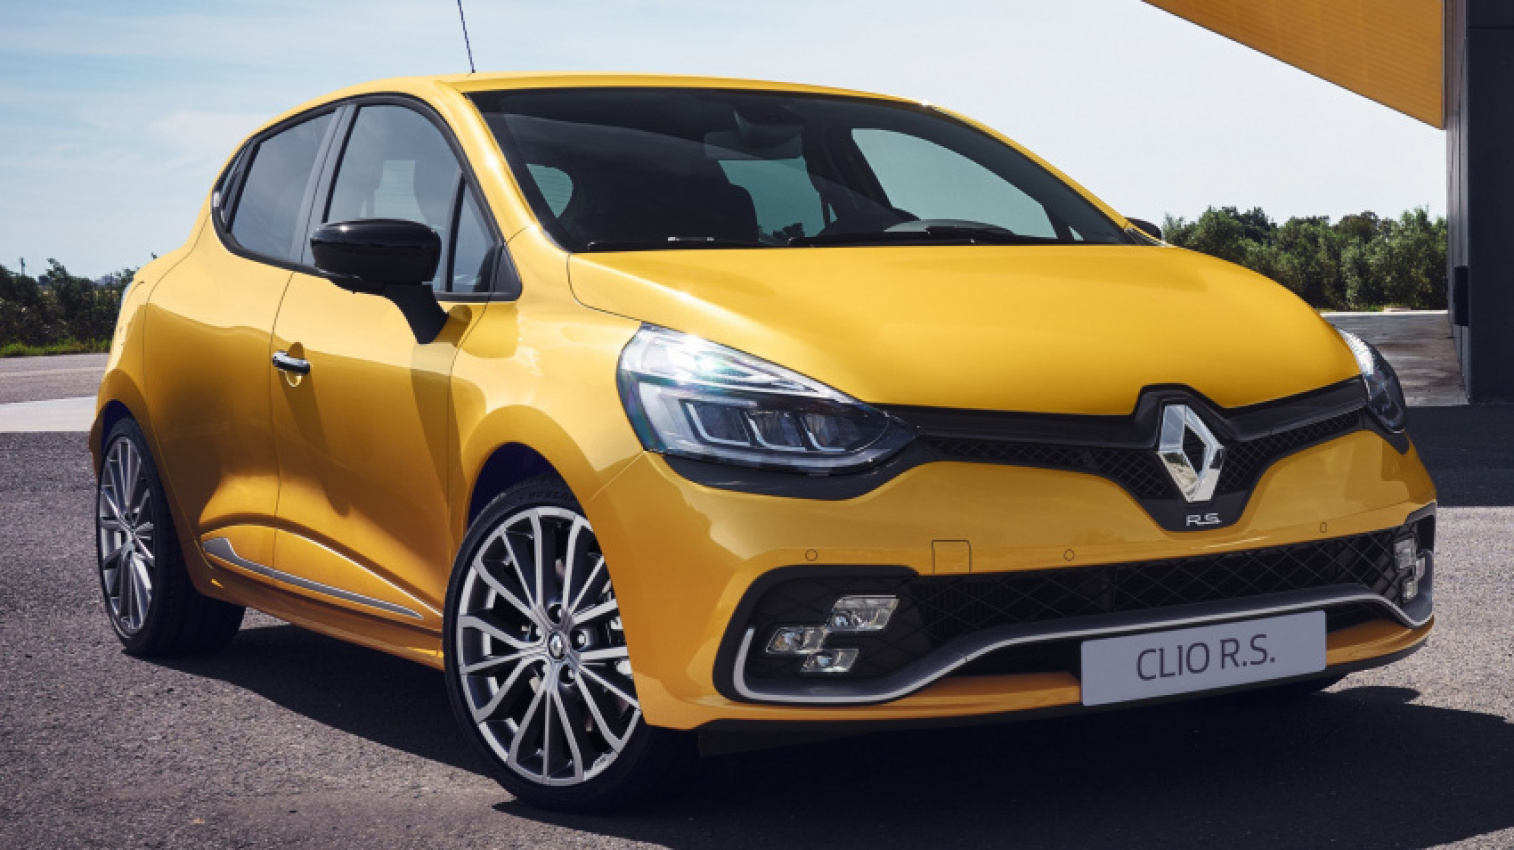 autos, cars, features, ford, ford fiesta st, opel, opel corsa opc, renault, renault clio rs, volkswagen, vw polo gti, what happened to all the vw polo gti’s competition